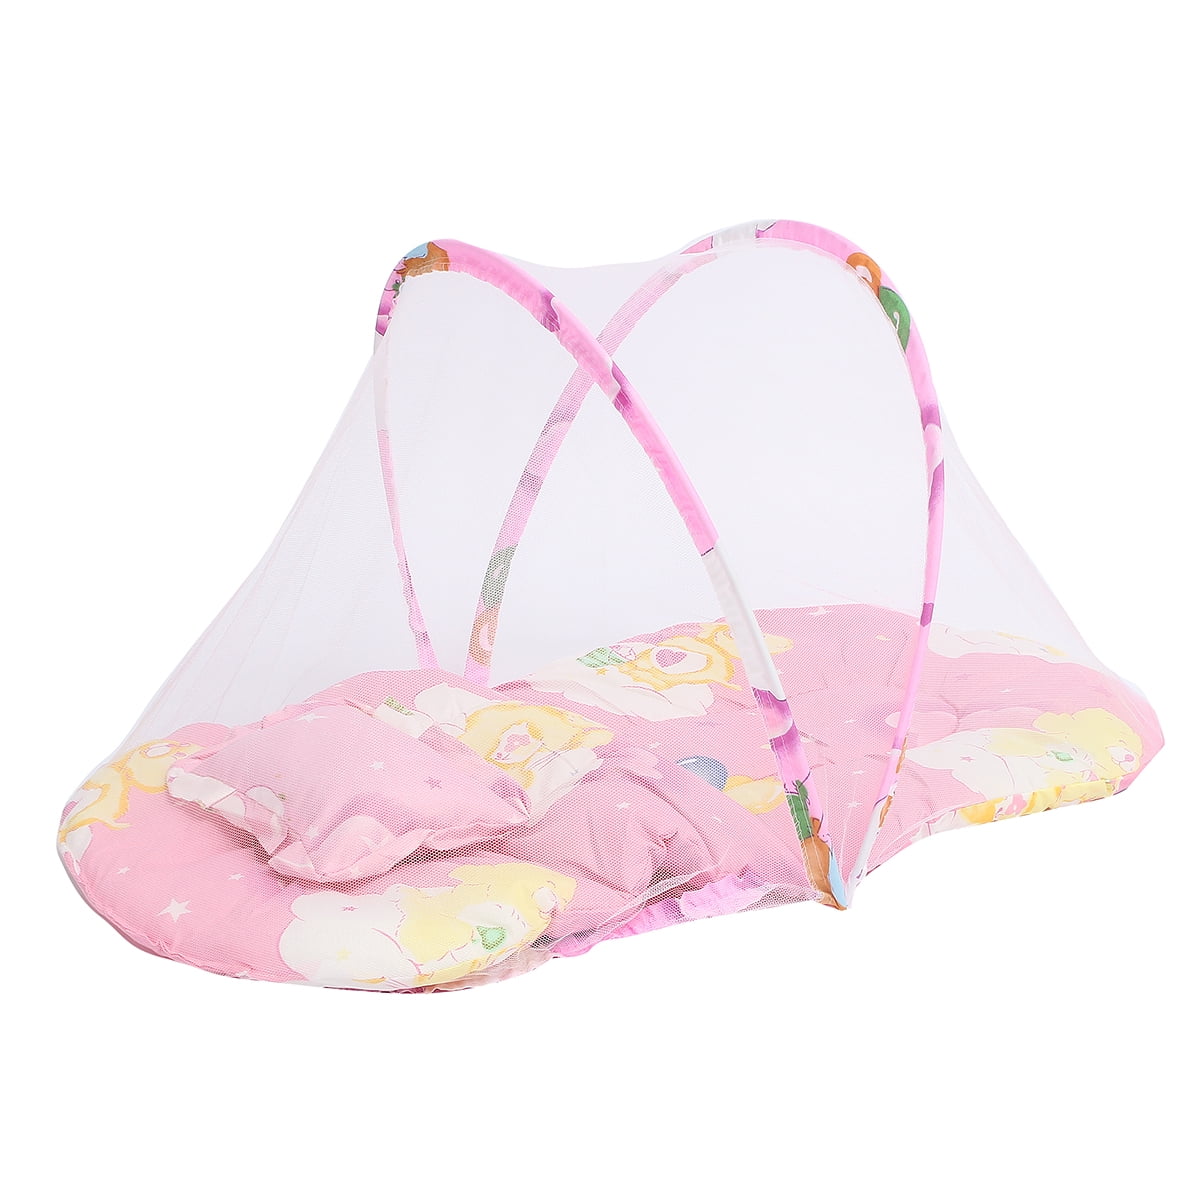 baby mosquito tent bed